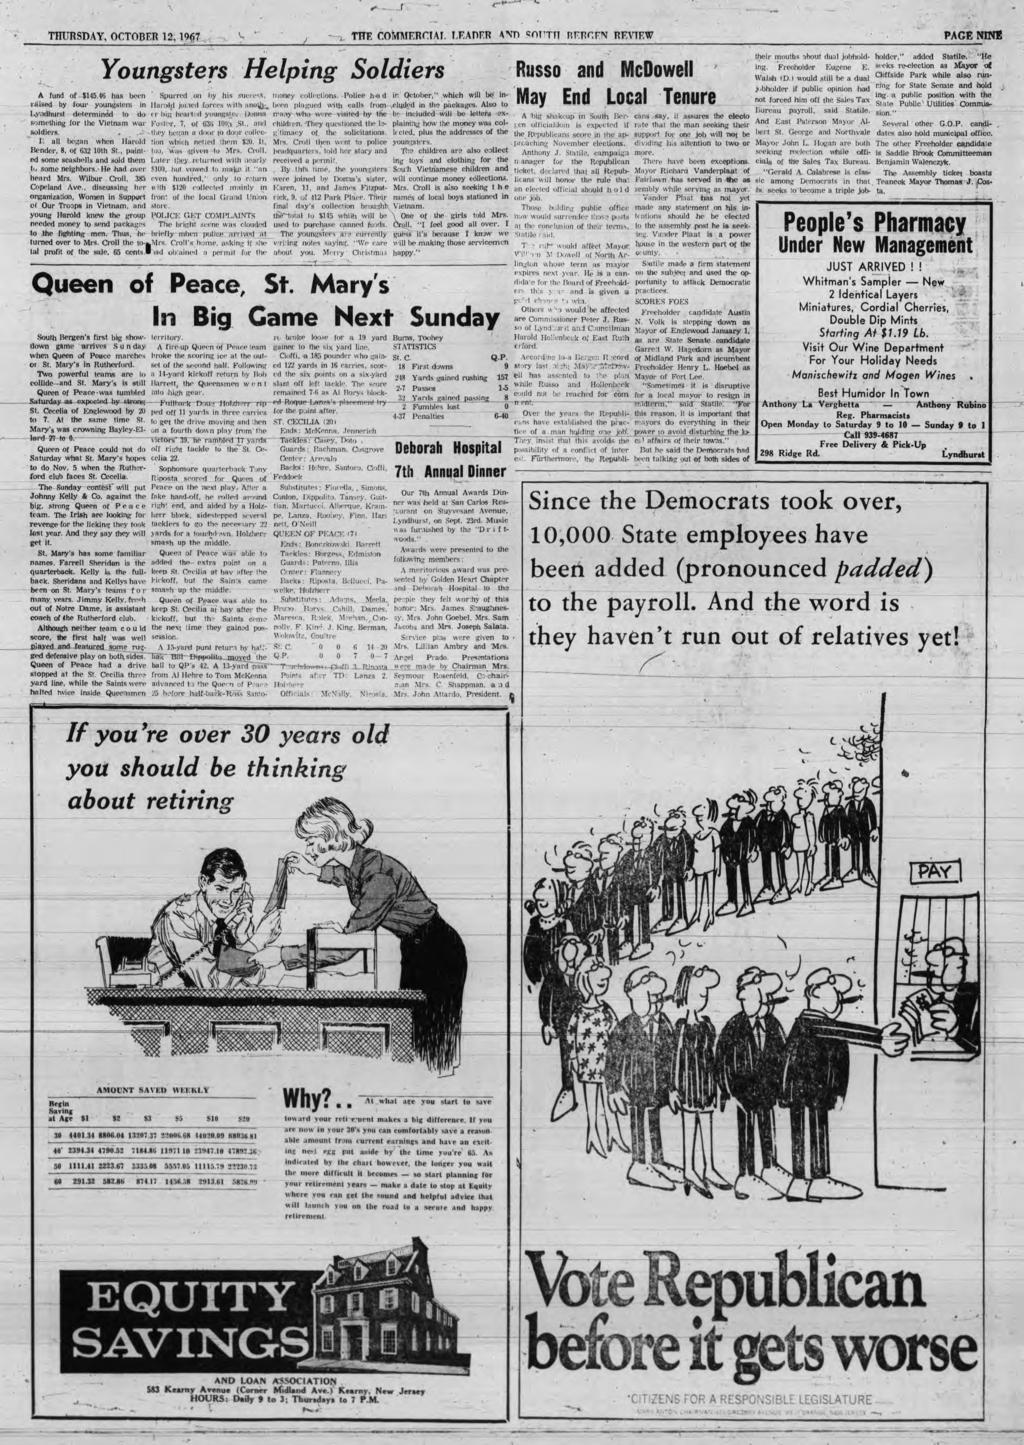 ... r THURSDAY, OCTOBER 12,1967 THE COMMERCIAL LEADER AND SorTTT RERCEN REVIEW PAGE NINE Youngsters Helping Soldiers A fund o f. $145.46 has been Spurred on by his succcs*.